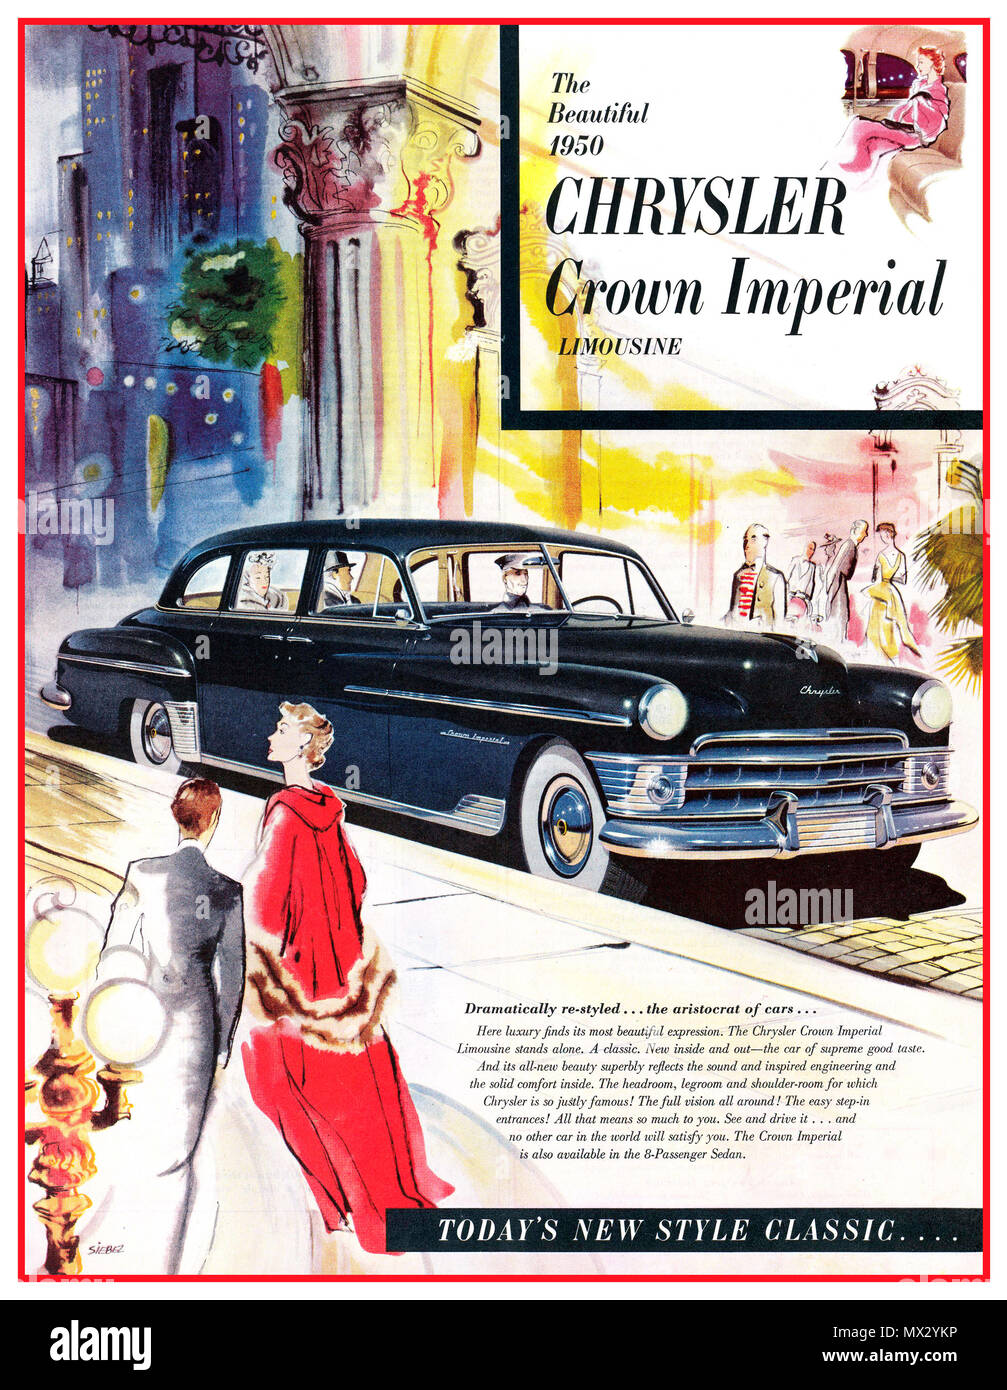 Vintage American 1950 Chrysler Crown Imperial Limousine motorcar automobile poster advertisement with revolutionary Four Wheel Disc Brakes Crown Imperial eight-passenger limousine 'today's new style classic' Stock Photo